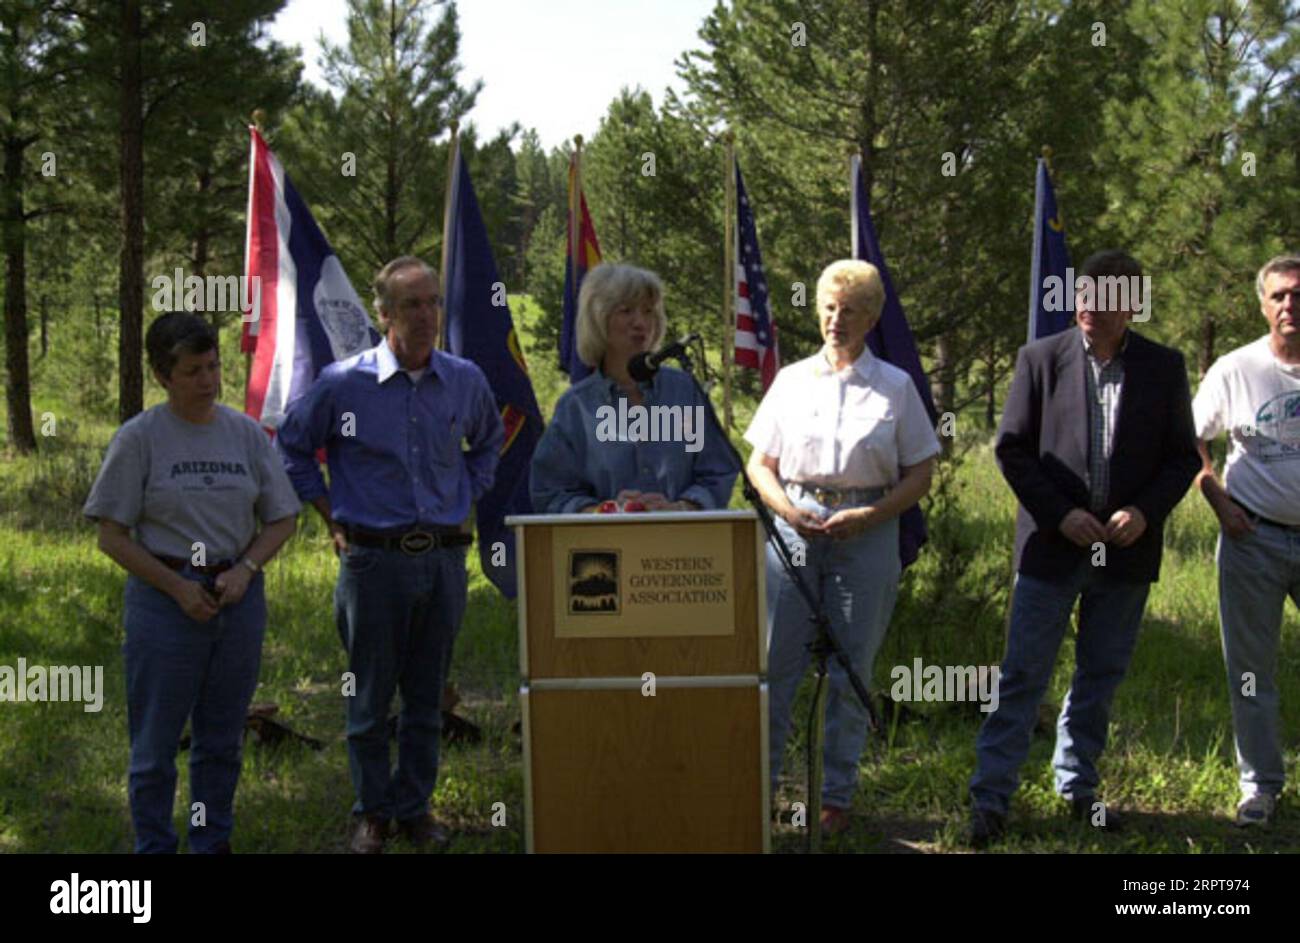 Arizona Governor Janet Napolitano, Idaho Governor Dirk Kempthorne, Secretary Gale Norton, Montana Governor Judy Martz, Wyoming Governor Dave Freudenthal, Forest Service Chief Dale Bosworth, left to right, appearing at Western Governors' Association Forest Health Summit in Missoula, Montana Stock Photo